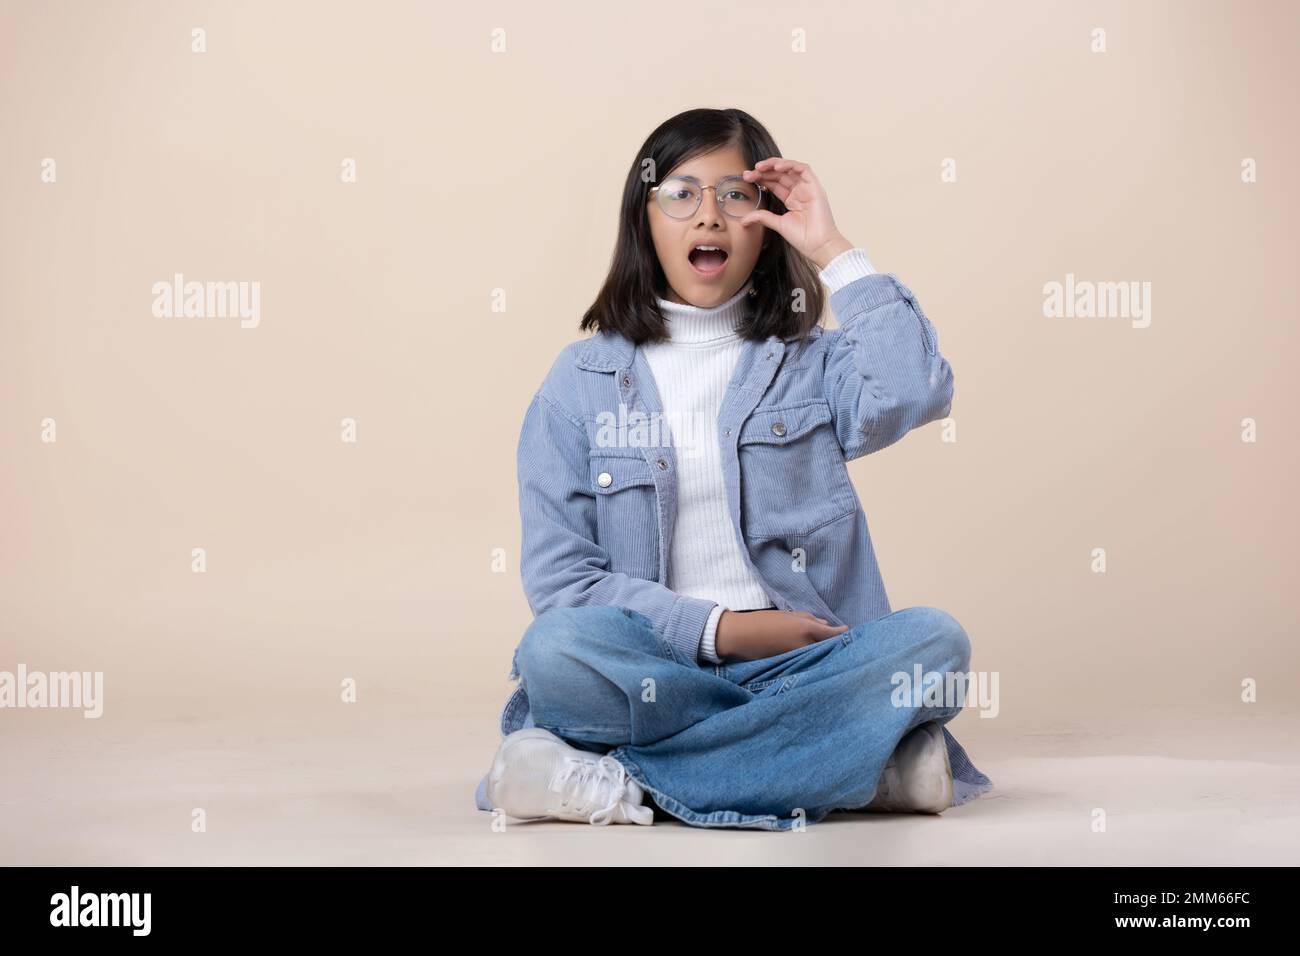 Mexican girl sitting on the floor wearing glasses surprised face Stock Photo